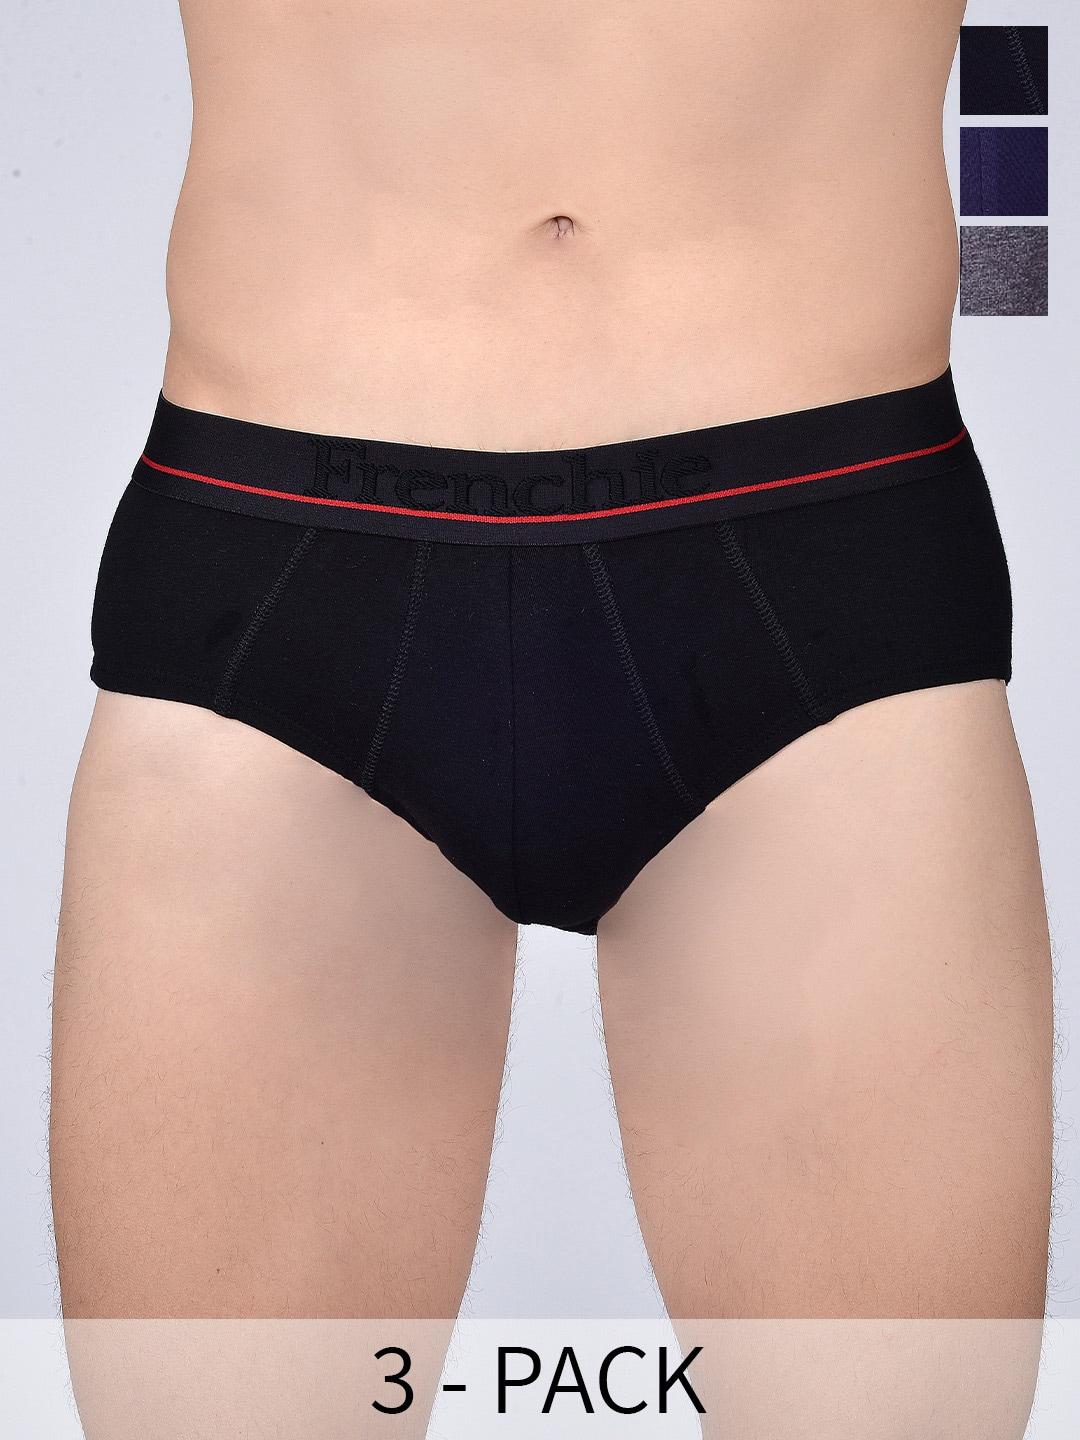 frenchie-men-pack-of-3-assorted-mid-rise-pure-cotton-briefs-casuals_4003_po3_s